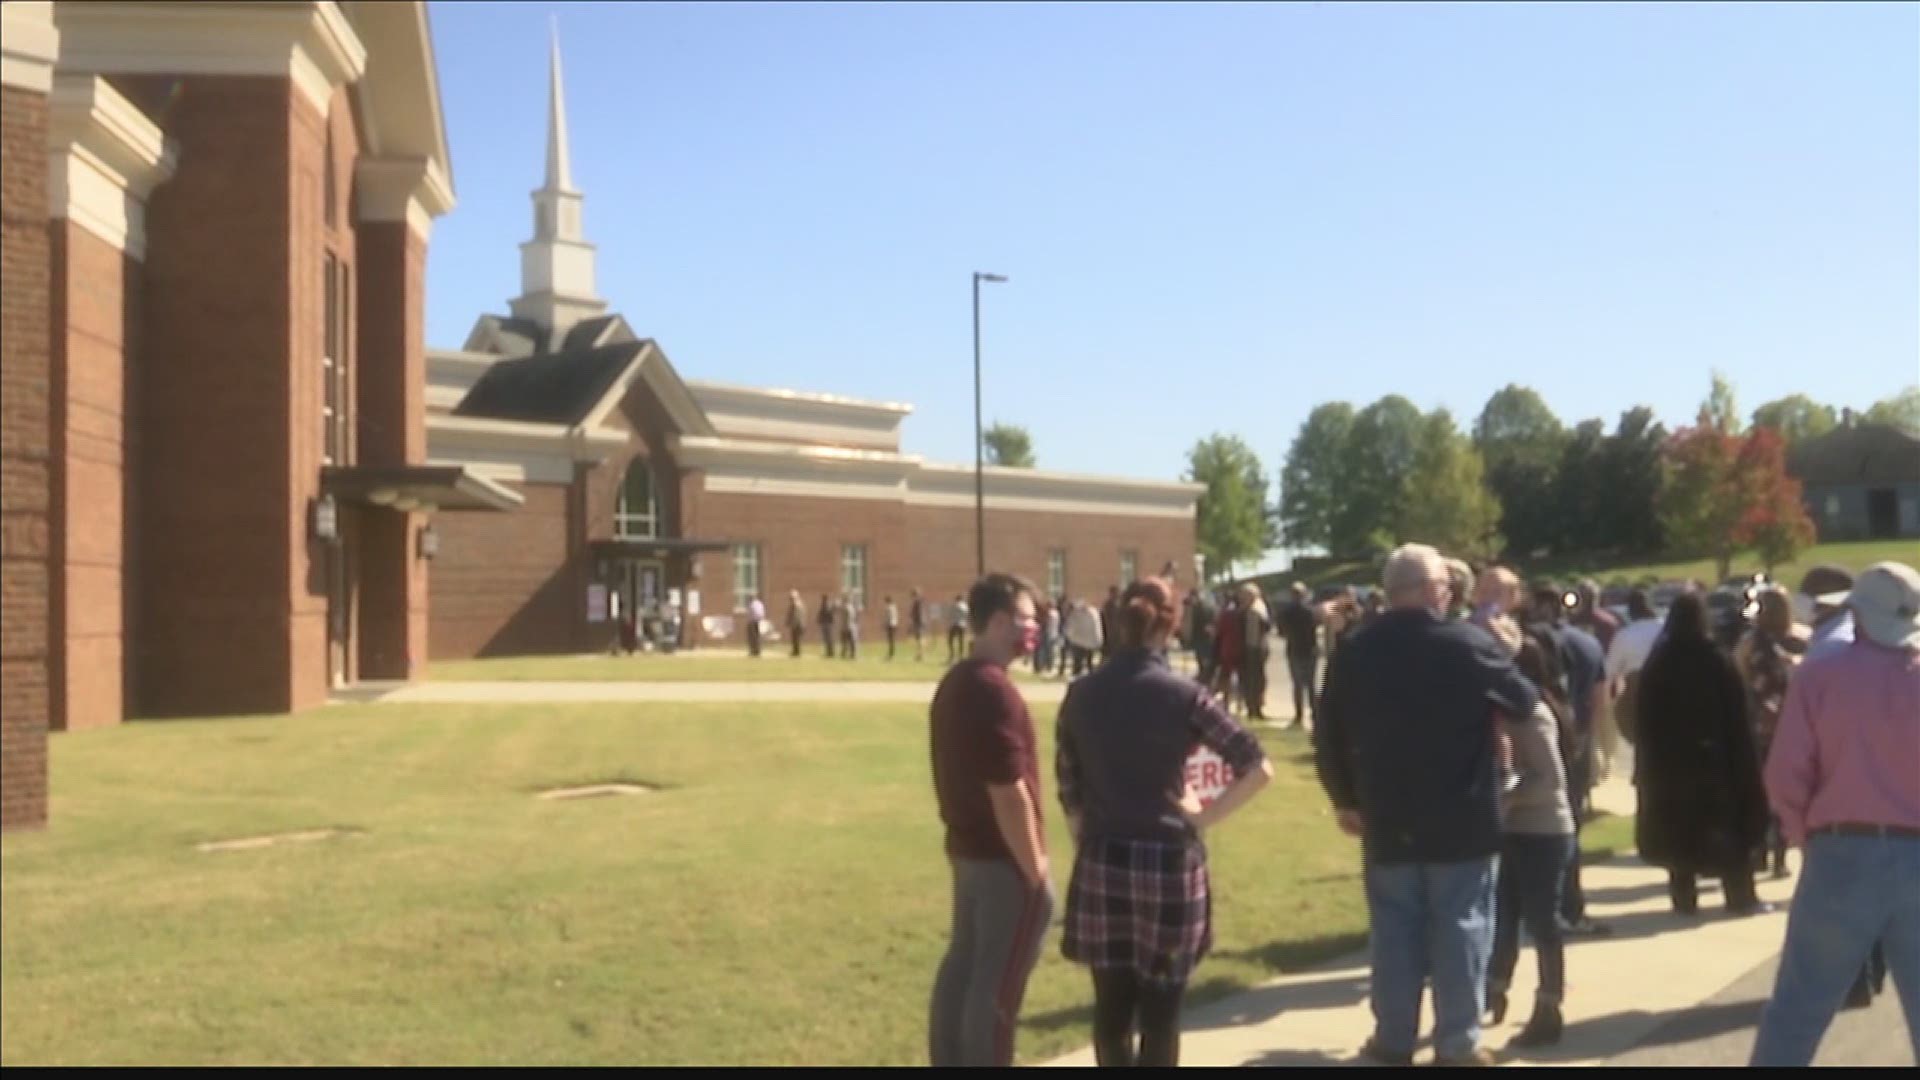 Voters at West Huntsville Church of Christ experience long wait times. They say at one point, the line was wrapped around the building four times.